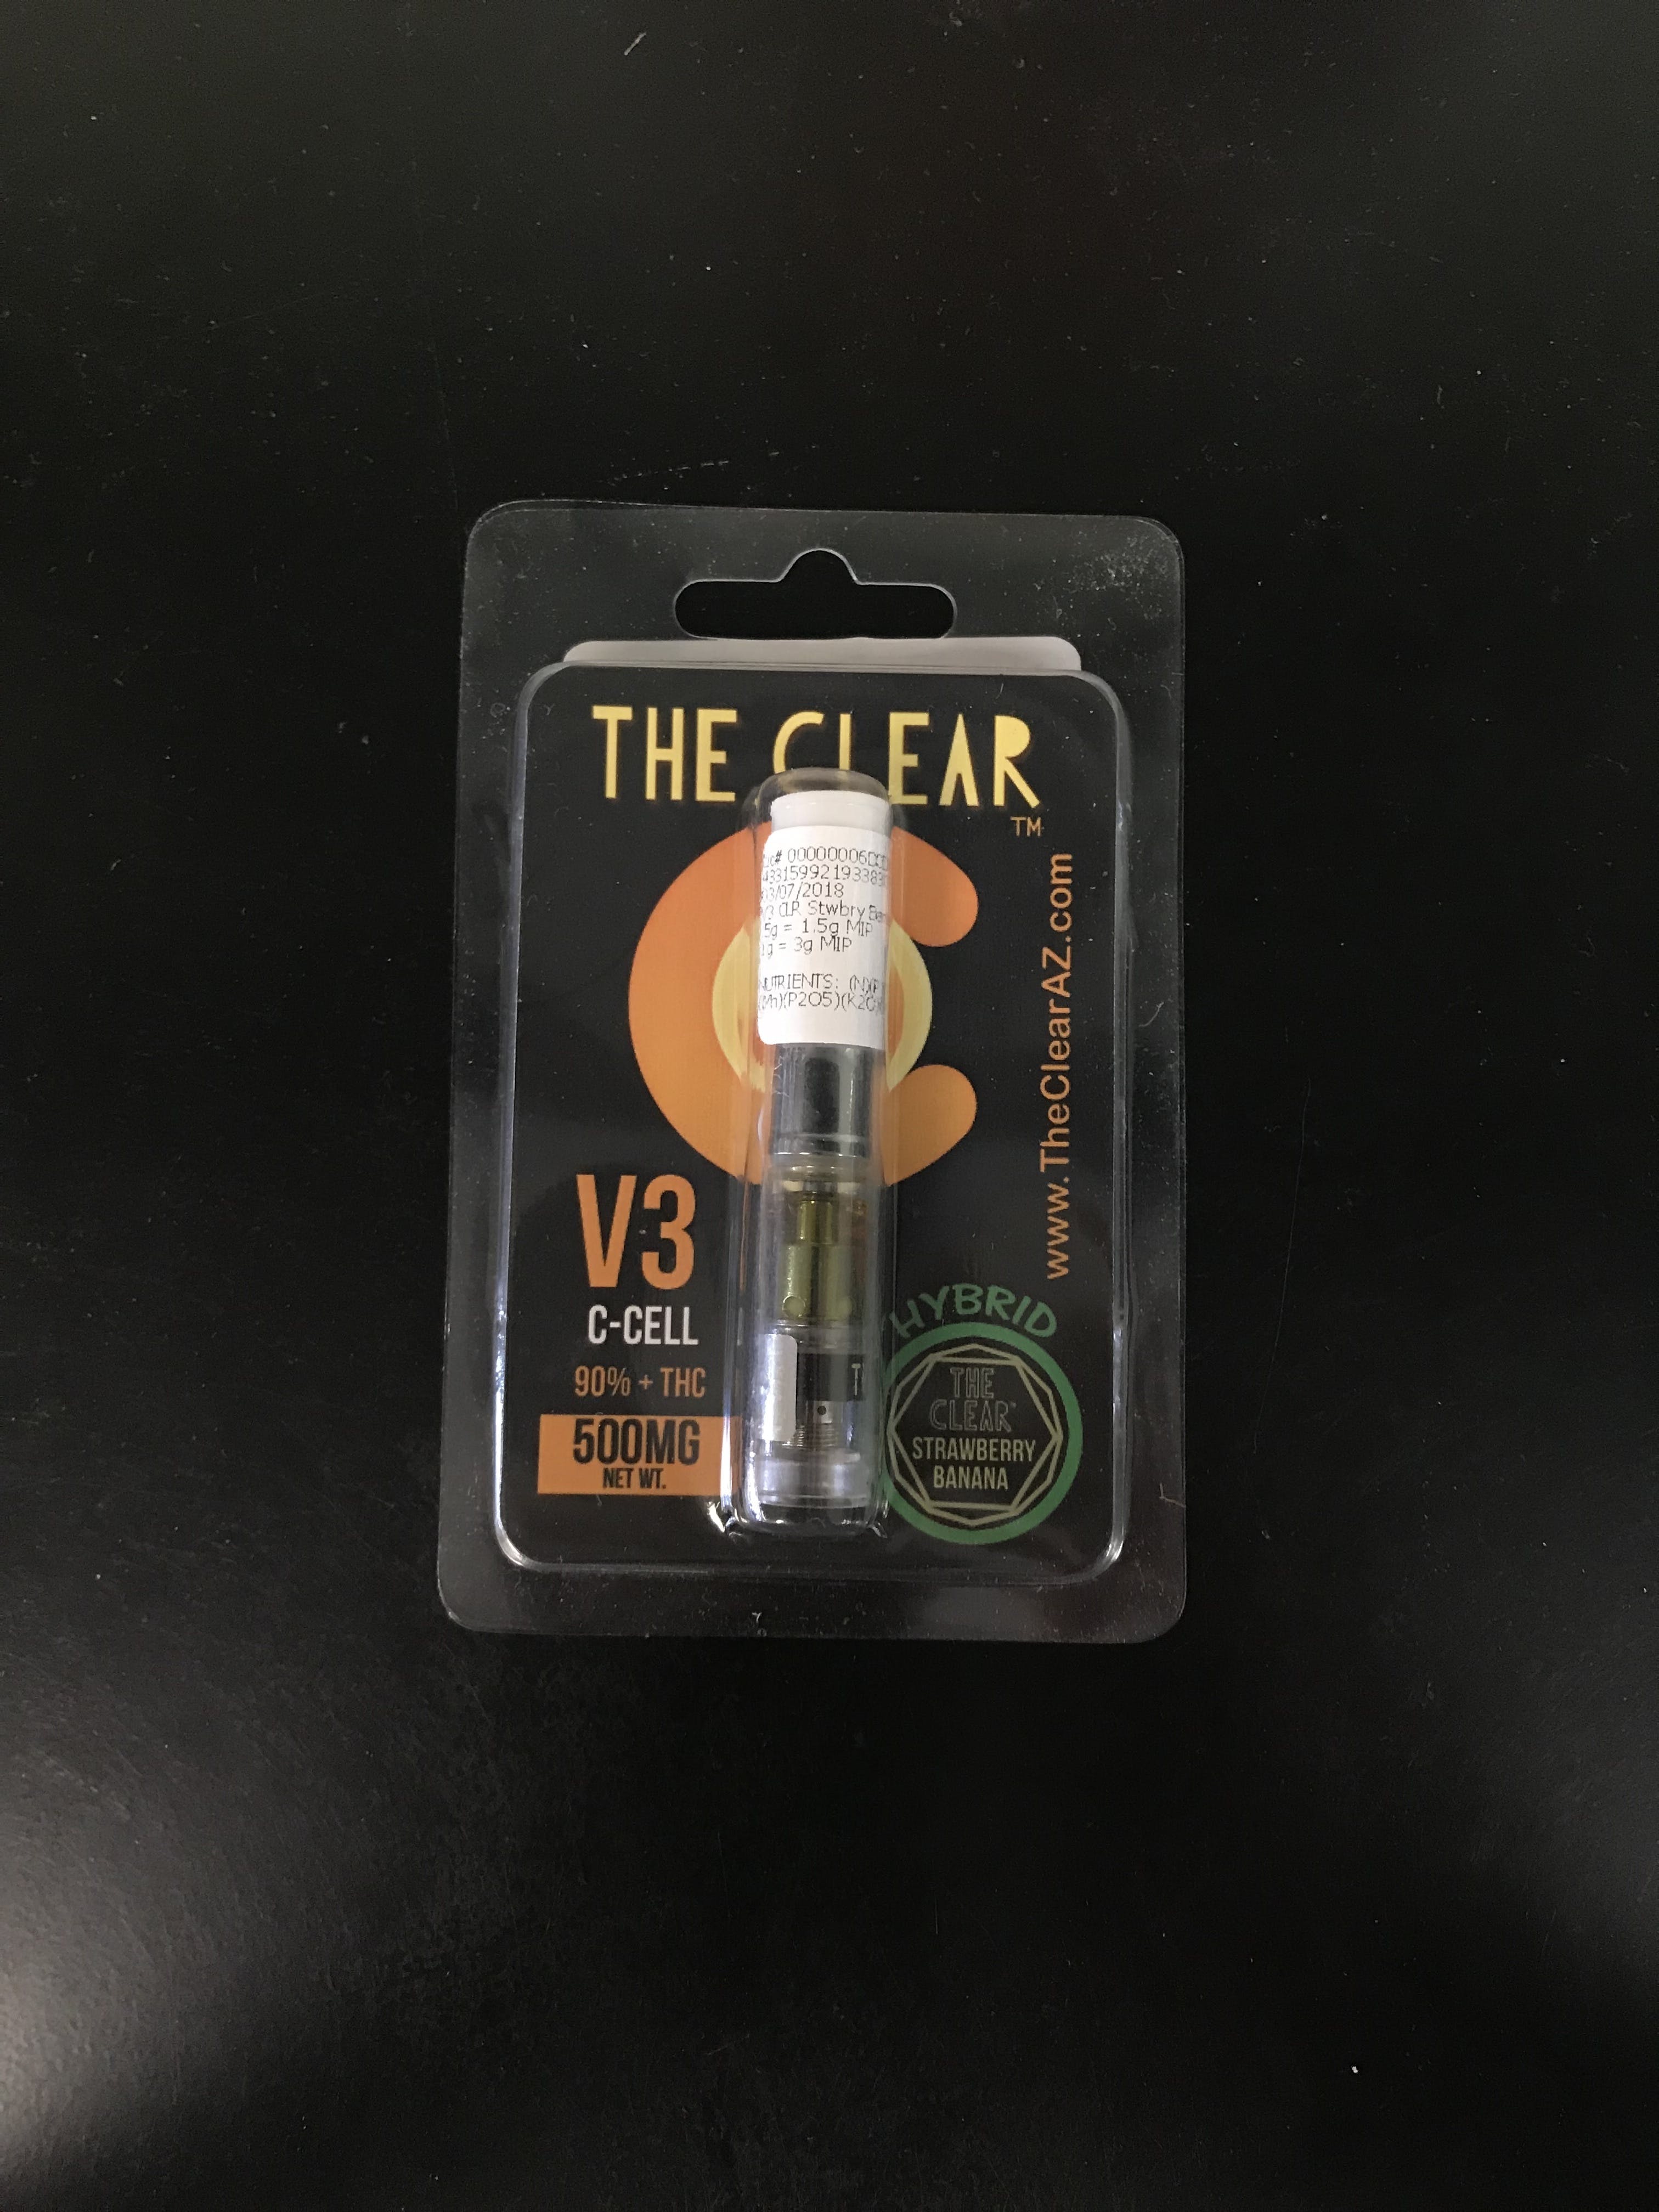 concentrate-the-clear-v3-strawberry-banana-500mg-cartridge